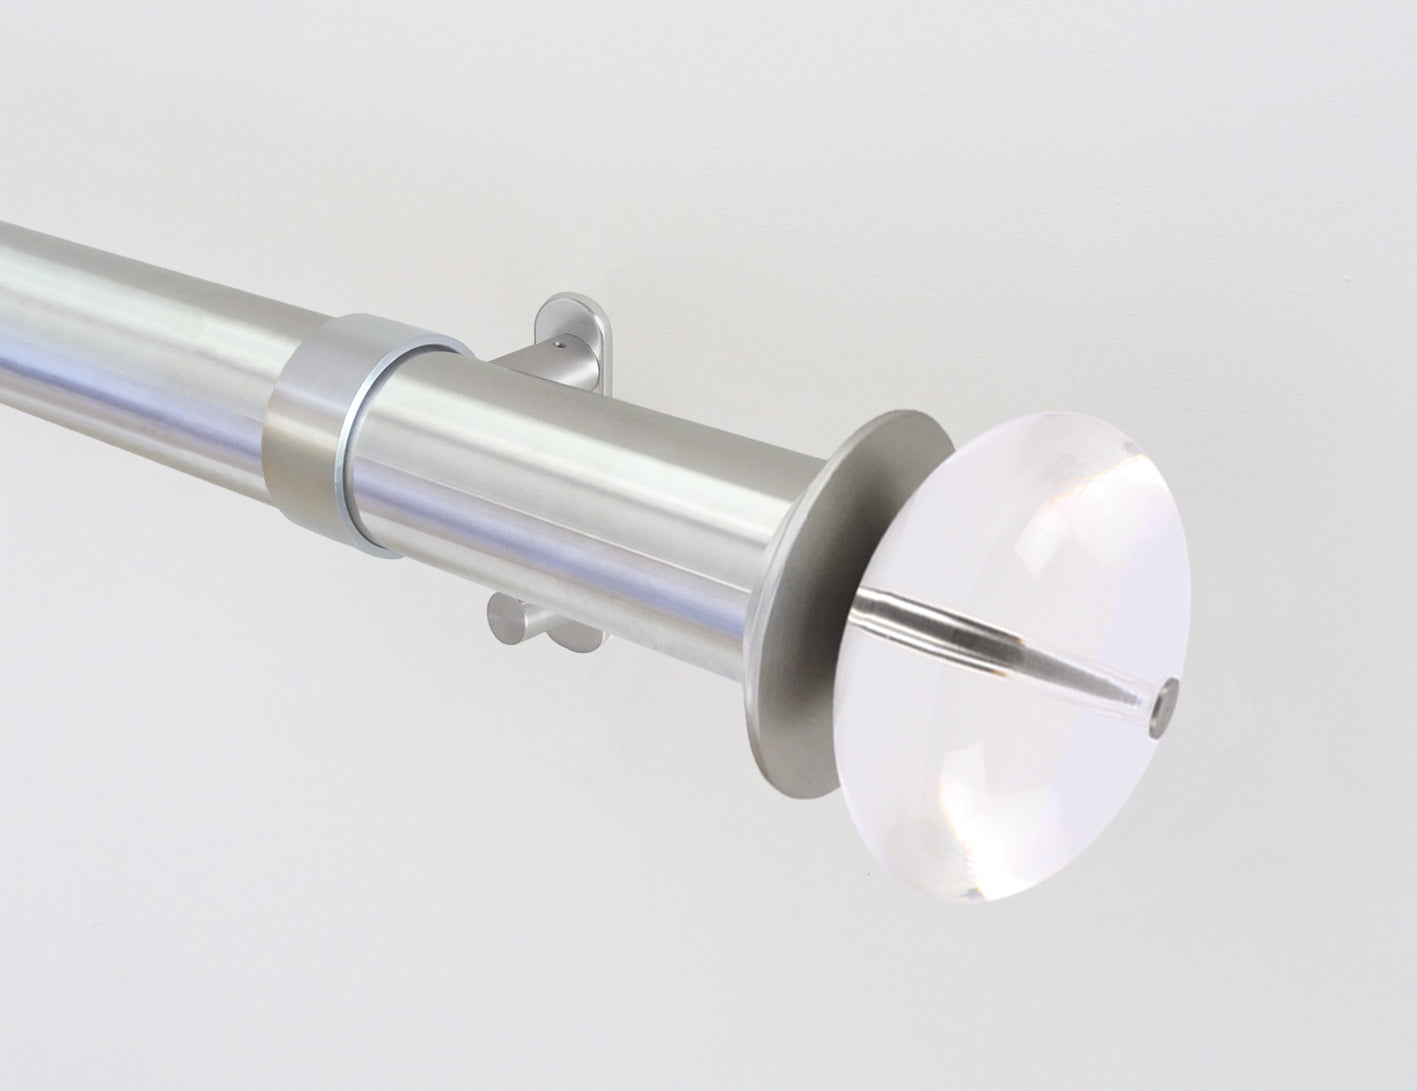 50mm diameter stainless steel metal curtain pole with acrylic ellipse finials